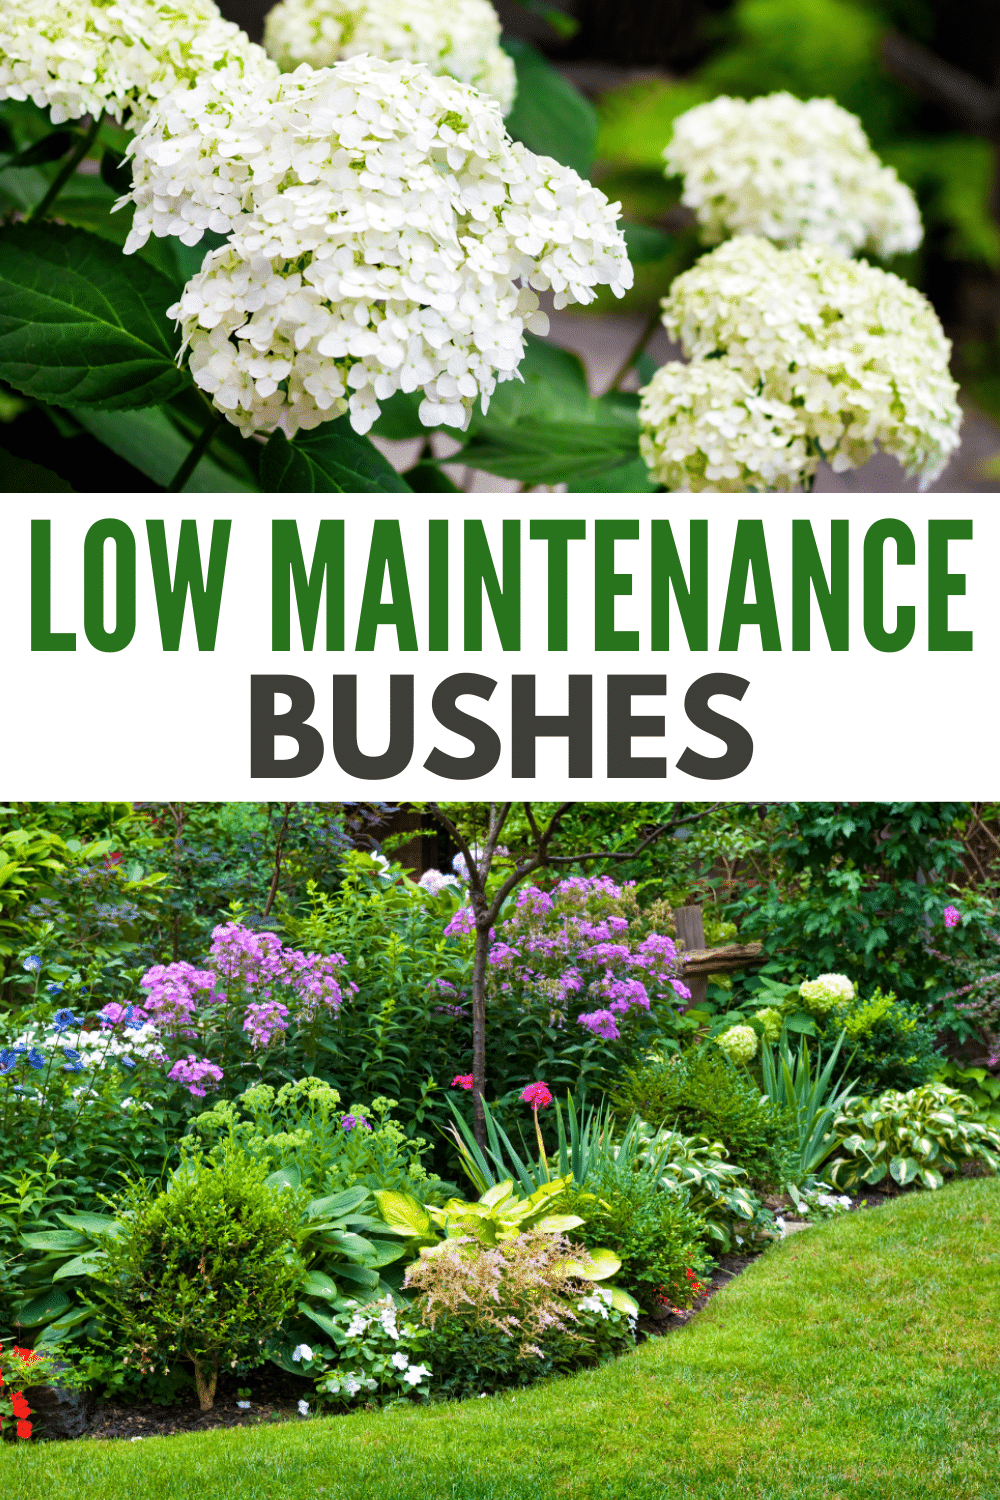 Low-maintenance bushes are some of the best ways to enhance the aesthetics of your yard without too much hassle. #lowmaintenancebushes #shrub #lowmaintenance #landscape #lowmaintenanceshrub via @wondermomwannab